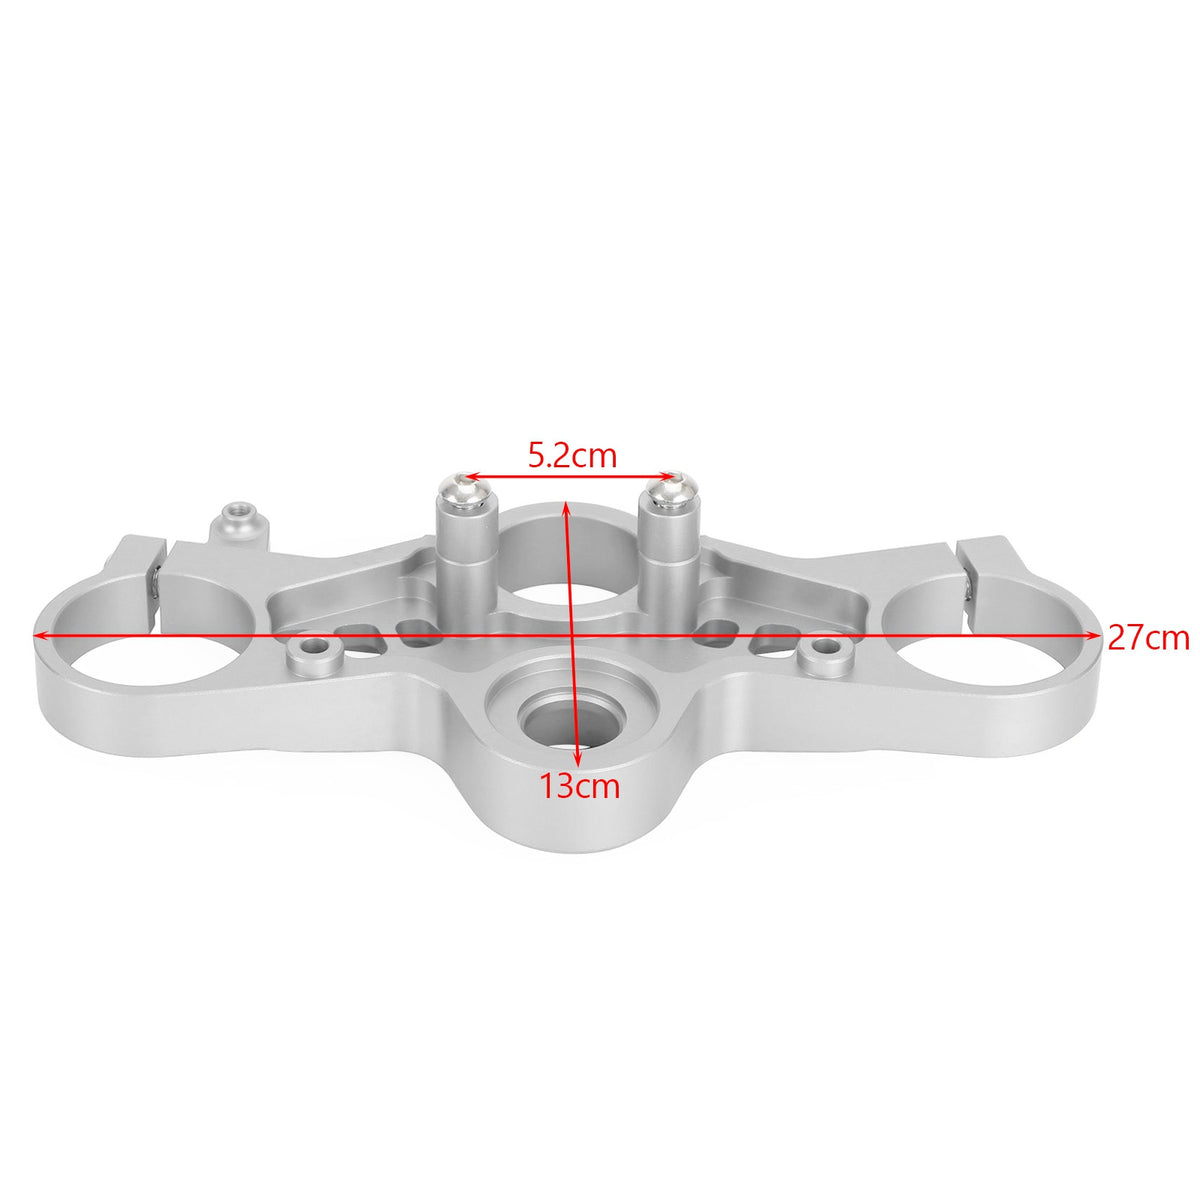 Aluminum Upper Front Top Triple Tree Clamp For Yamaha YZF-R7 2021-2023